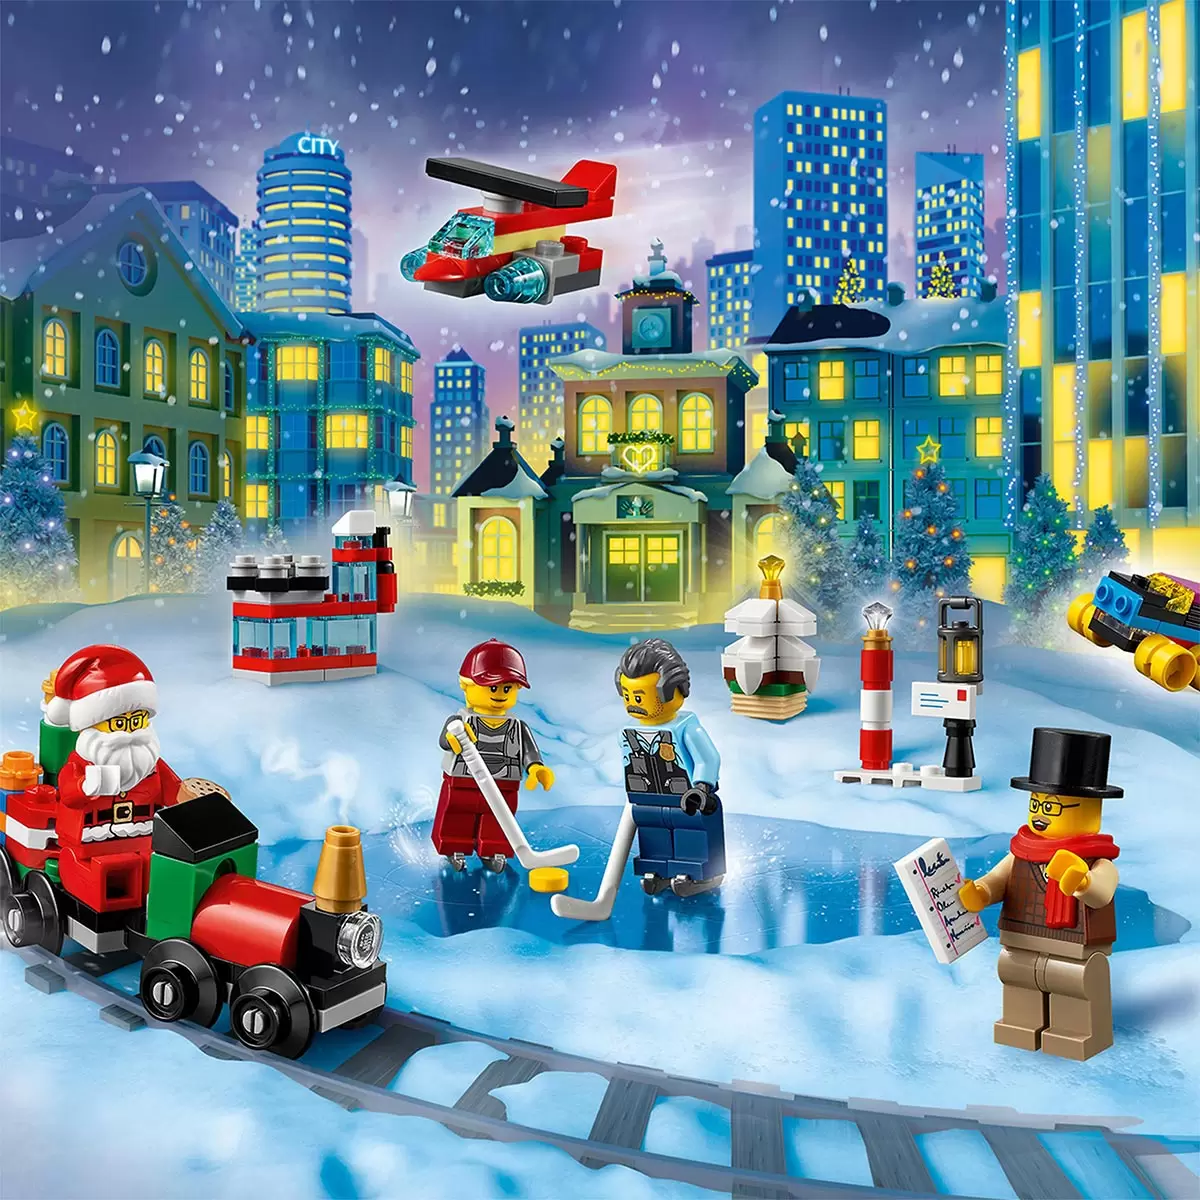 Buy LEGO City Advent Calendar Features1 Image at Costco.co.uk